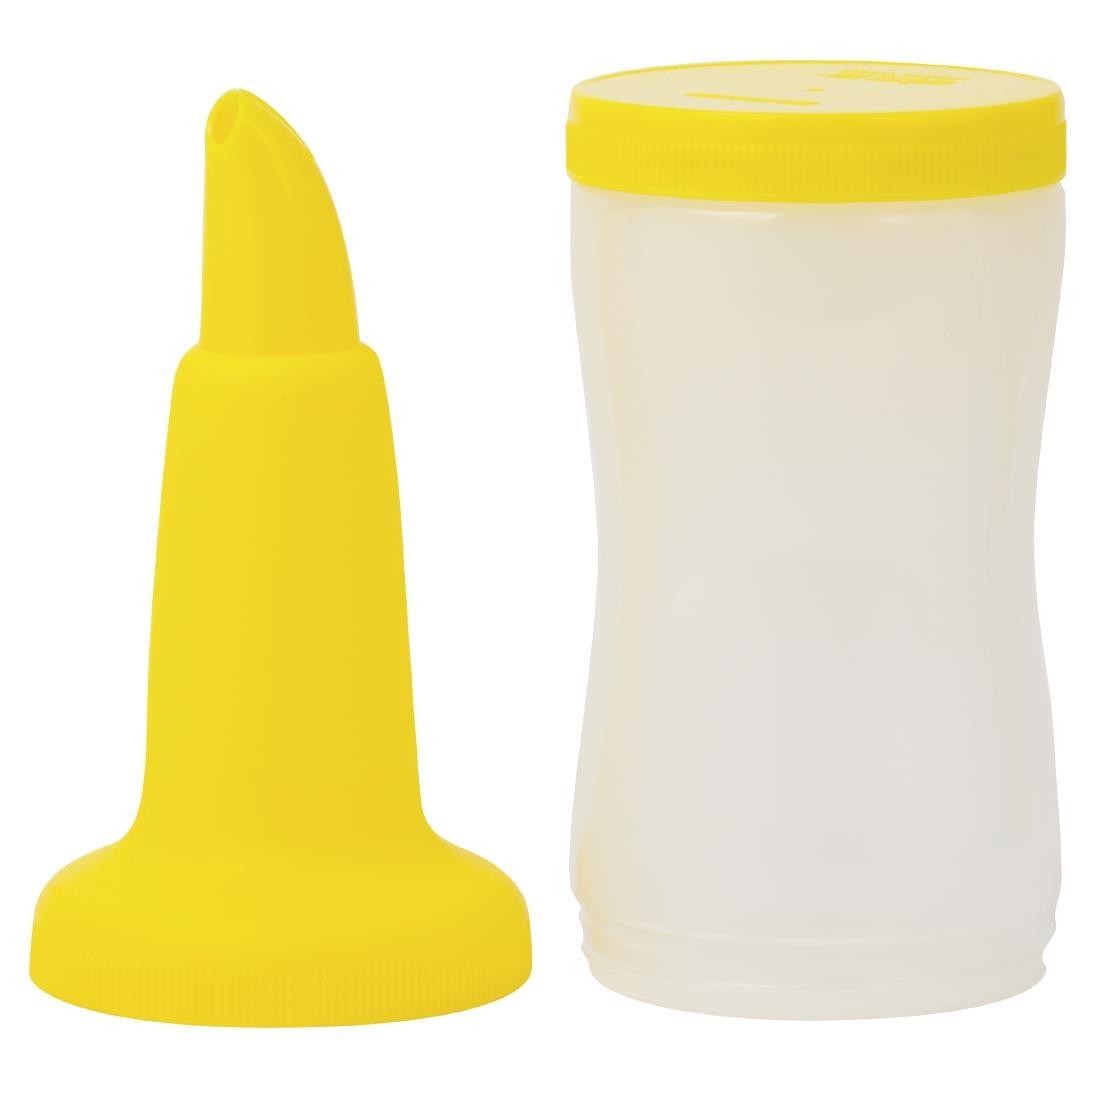 Beaumont Juice Pour and Store Yellow - DL262  - 2